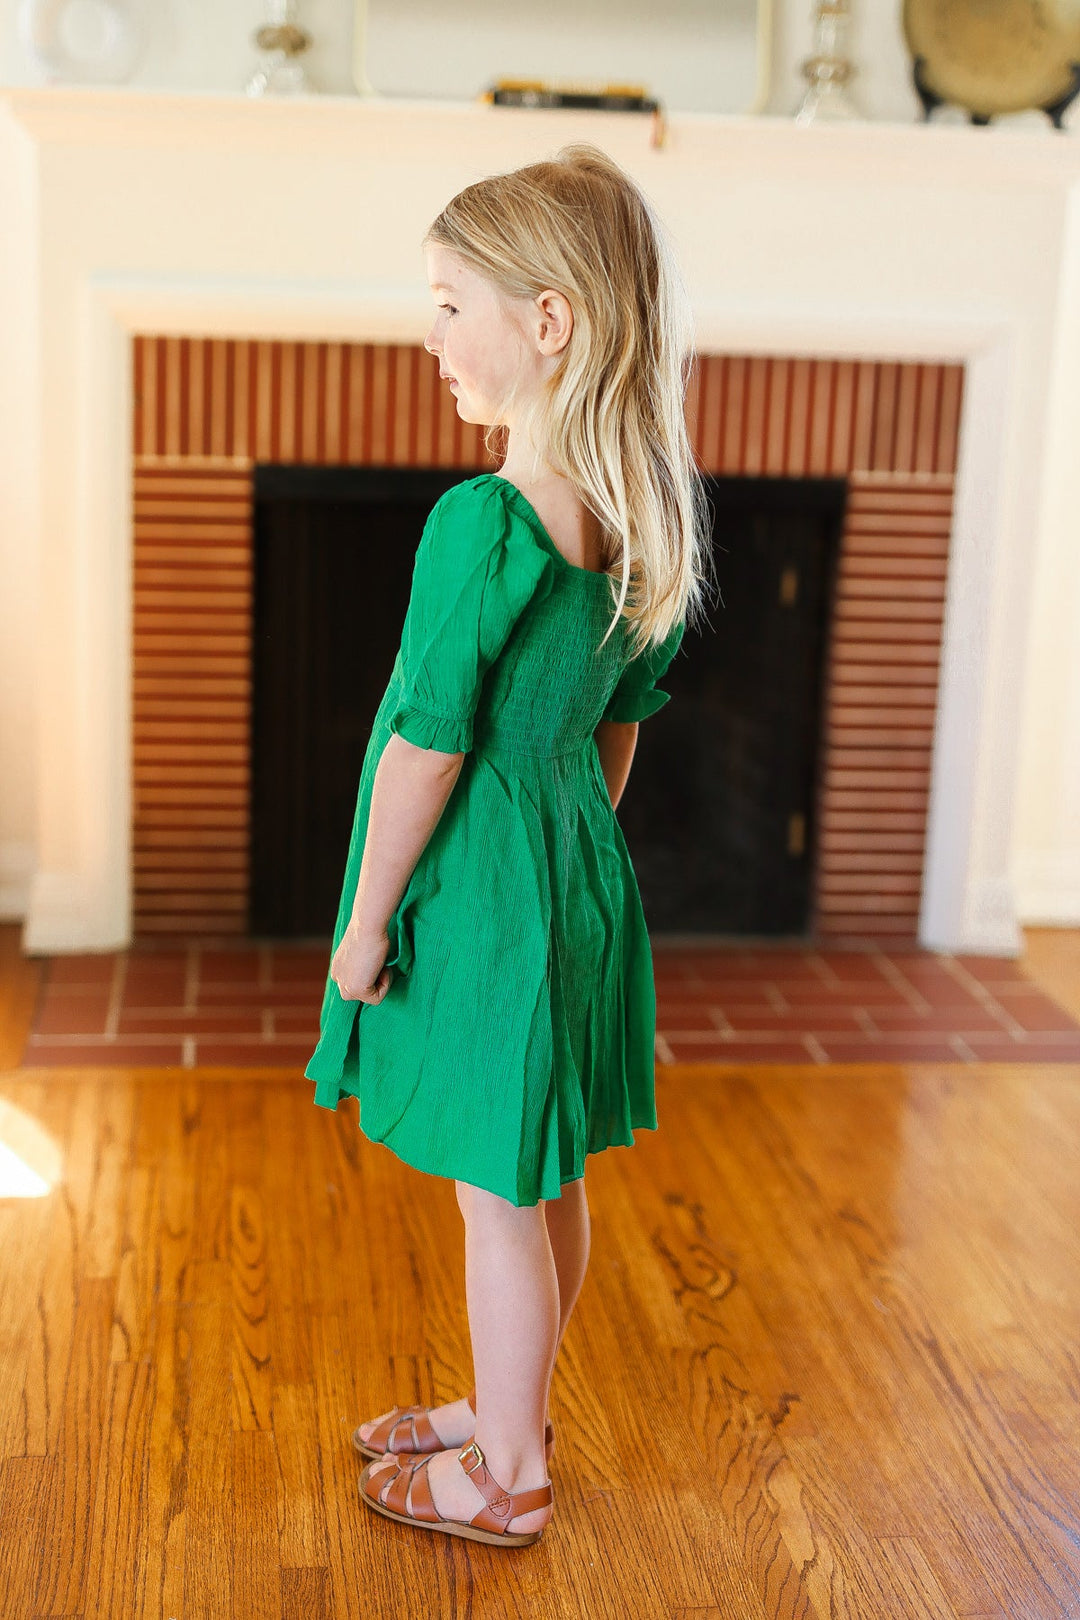 Loved And Adored - Kids' Square-Neck Ruche-Back Dress - Emerald Green